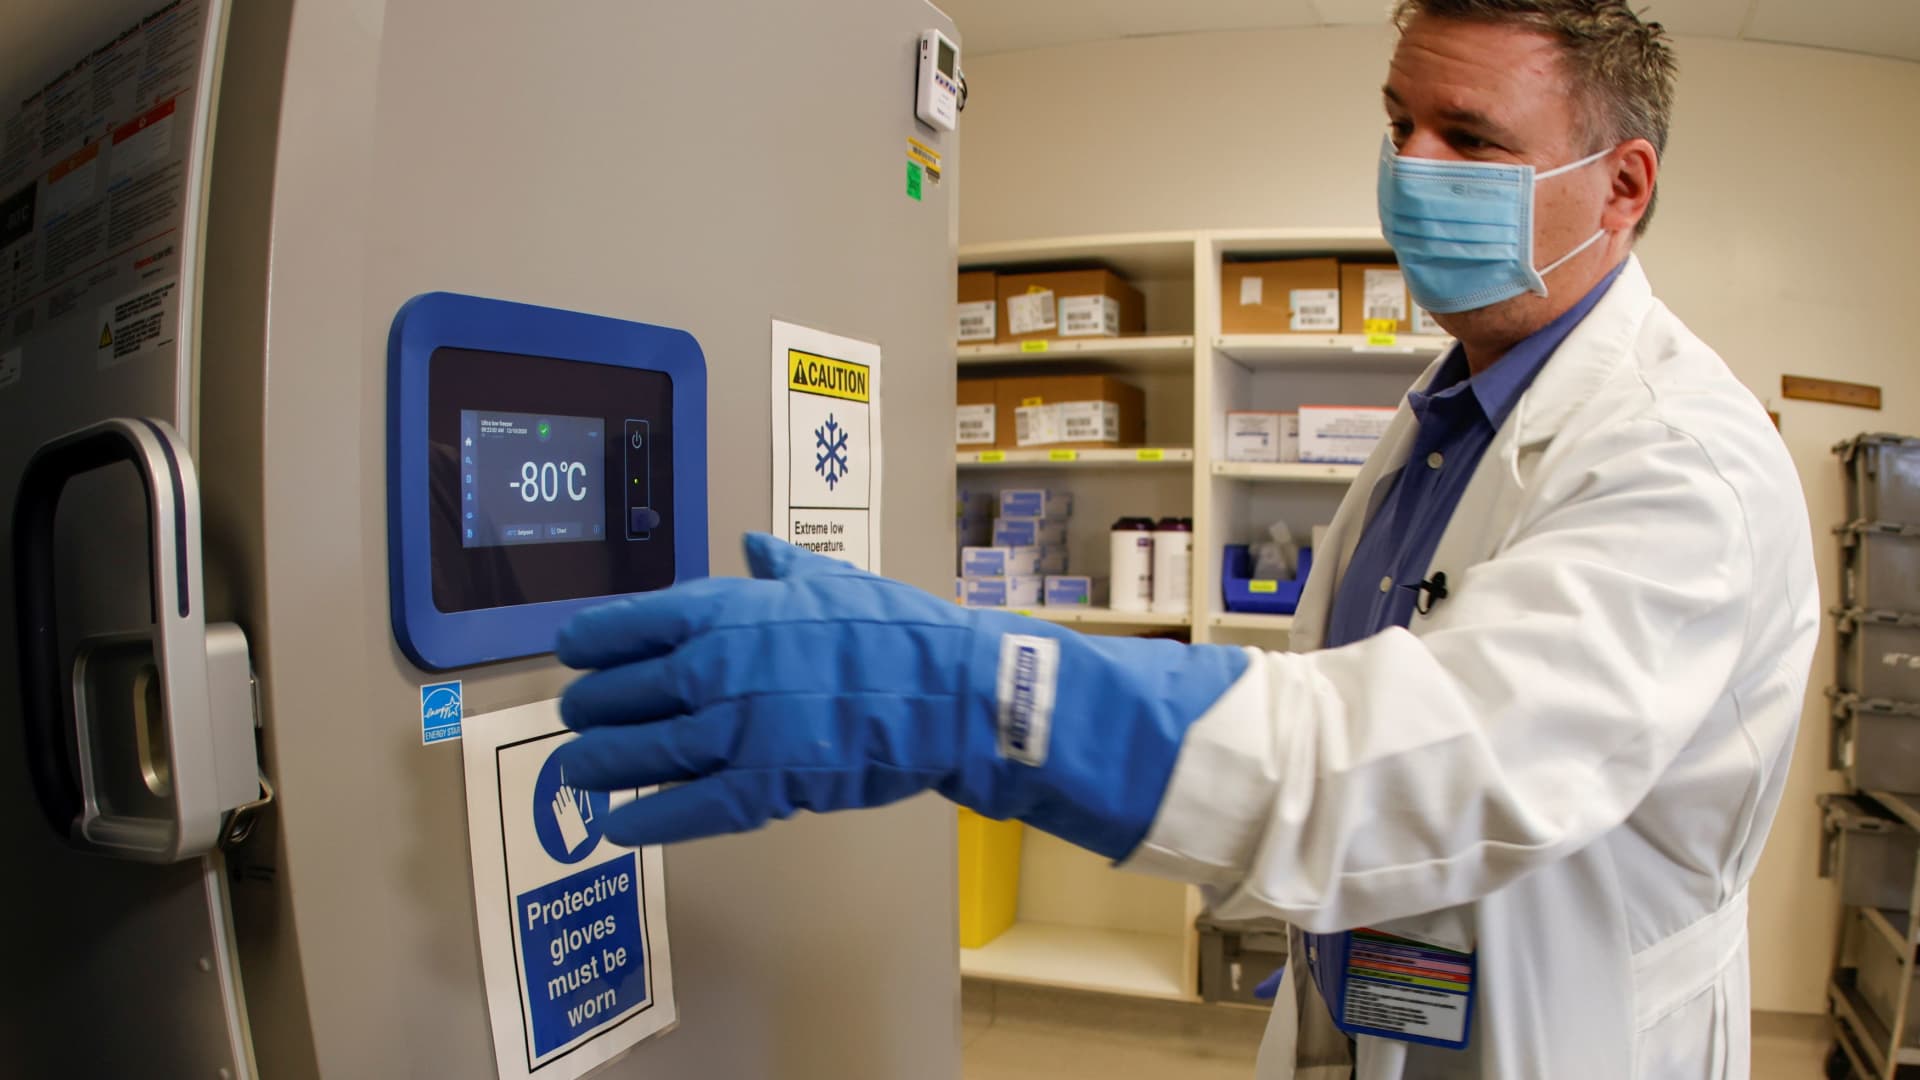 Pharmacy supervisor Kevin Weissman uses a thick glove as he opens the door of a special freezer that will hold the Pfizer vaccine at LAC USC Medical Center during the outbreak of the coronavirus disease (COVID-19) in Los Angeles, California, December 10, 2020.